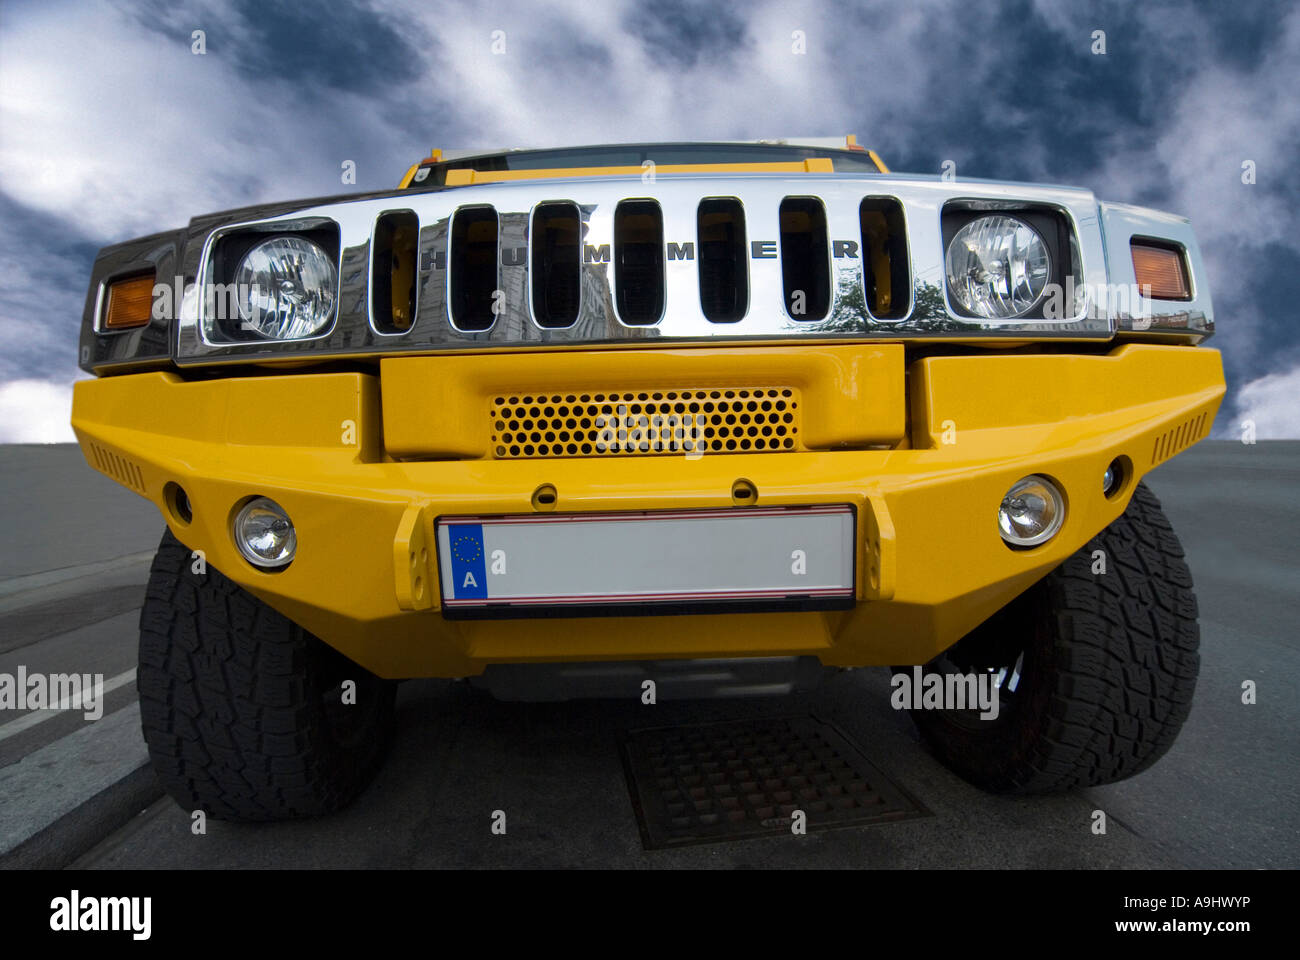 Hummer H2 SUV, frontal view Stock Photo